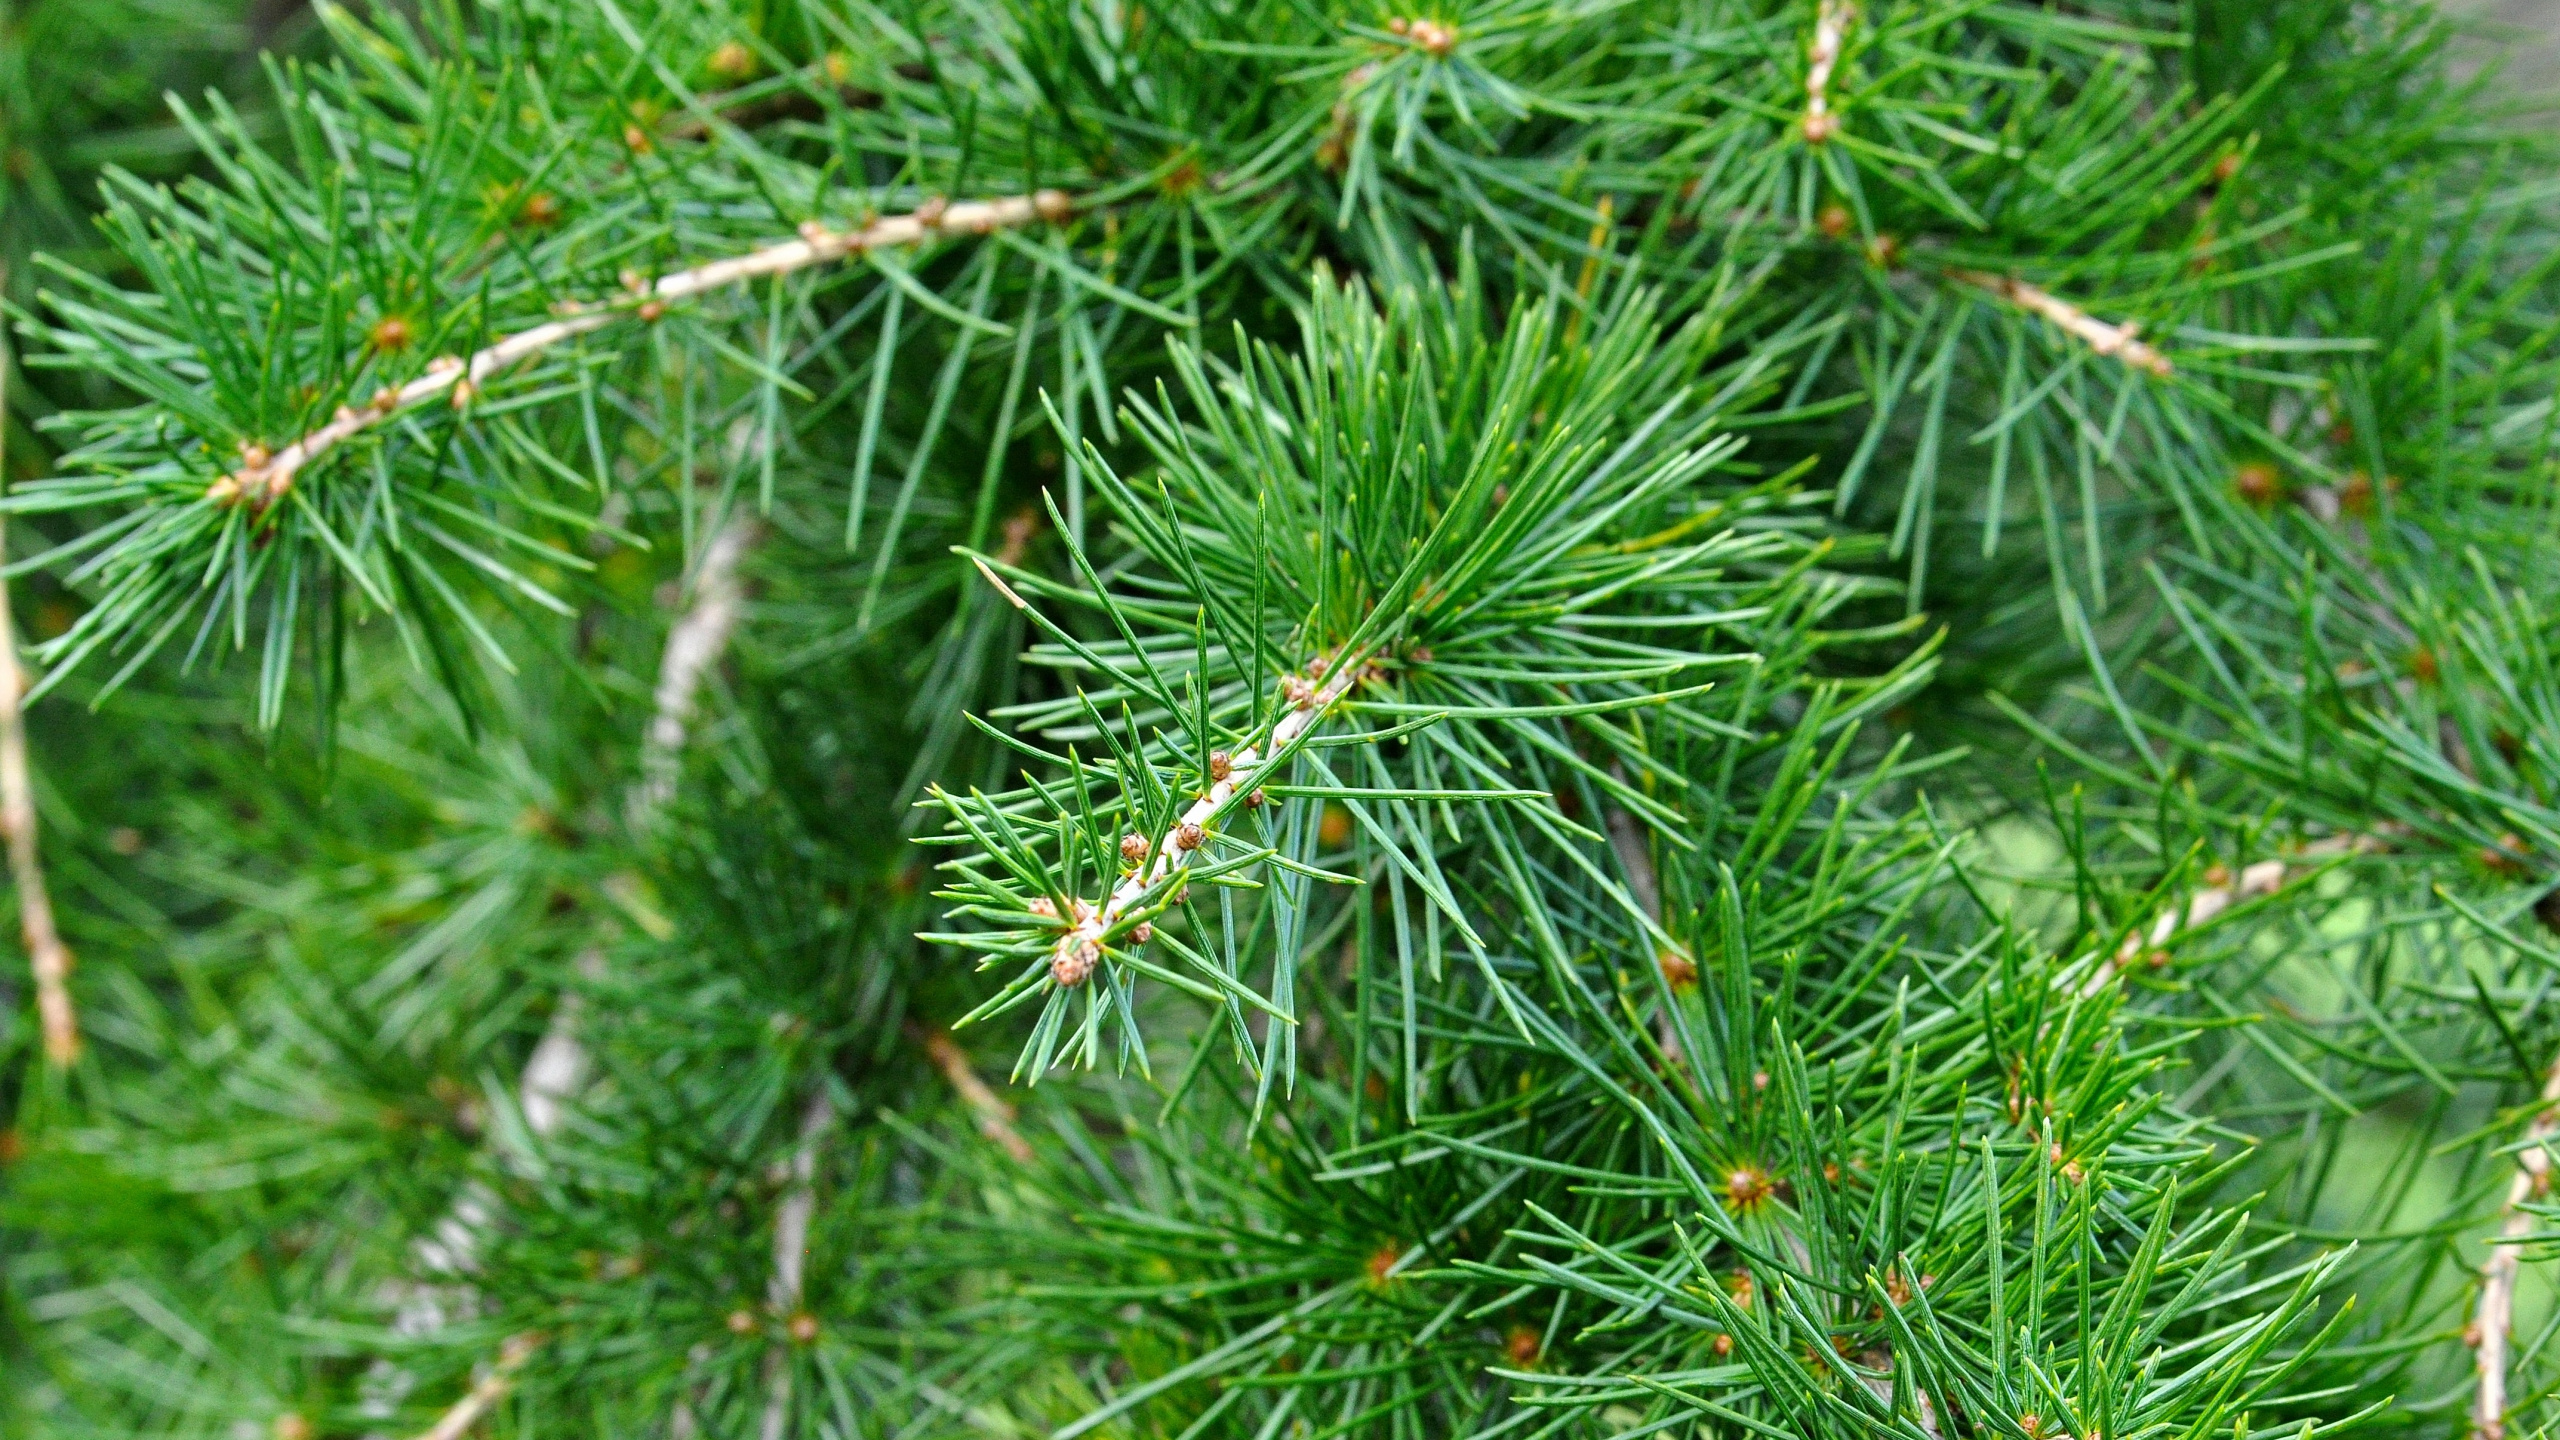 Green Pine Tree in Close up Photography. Wallpaper in 2560x1440 Resolution